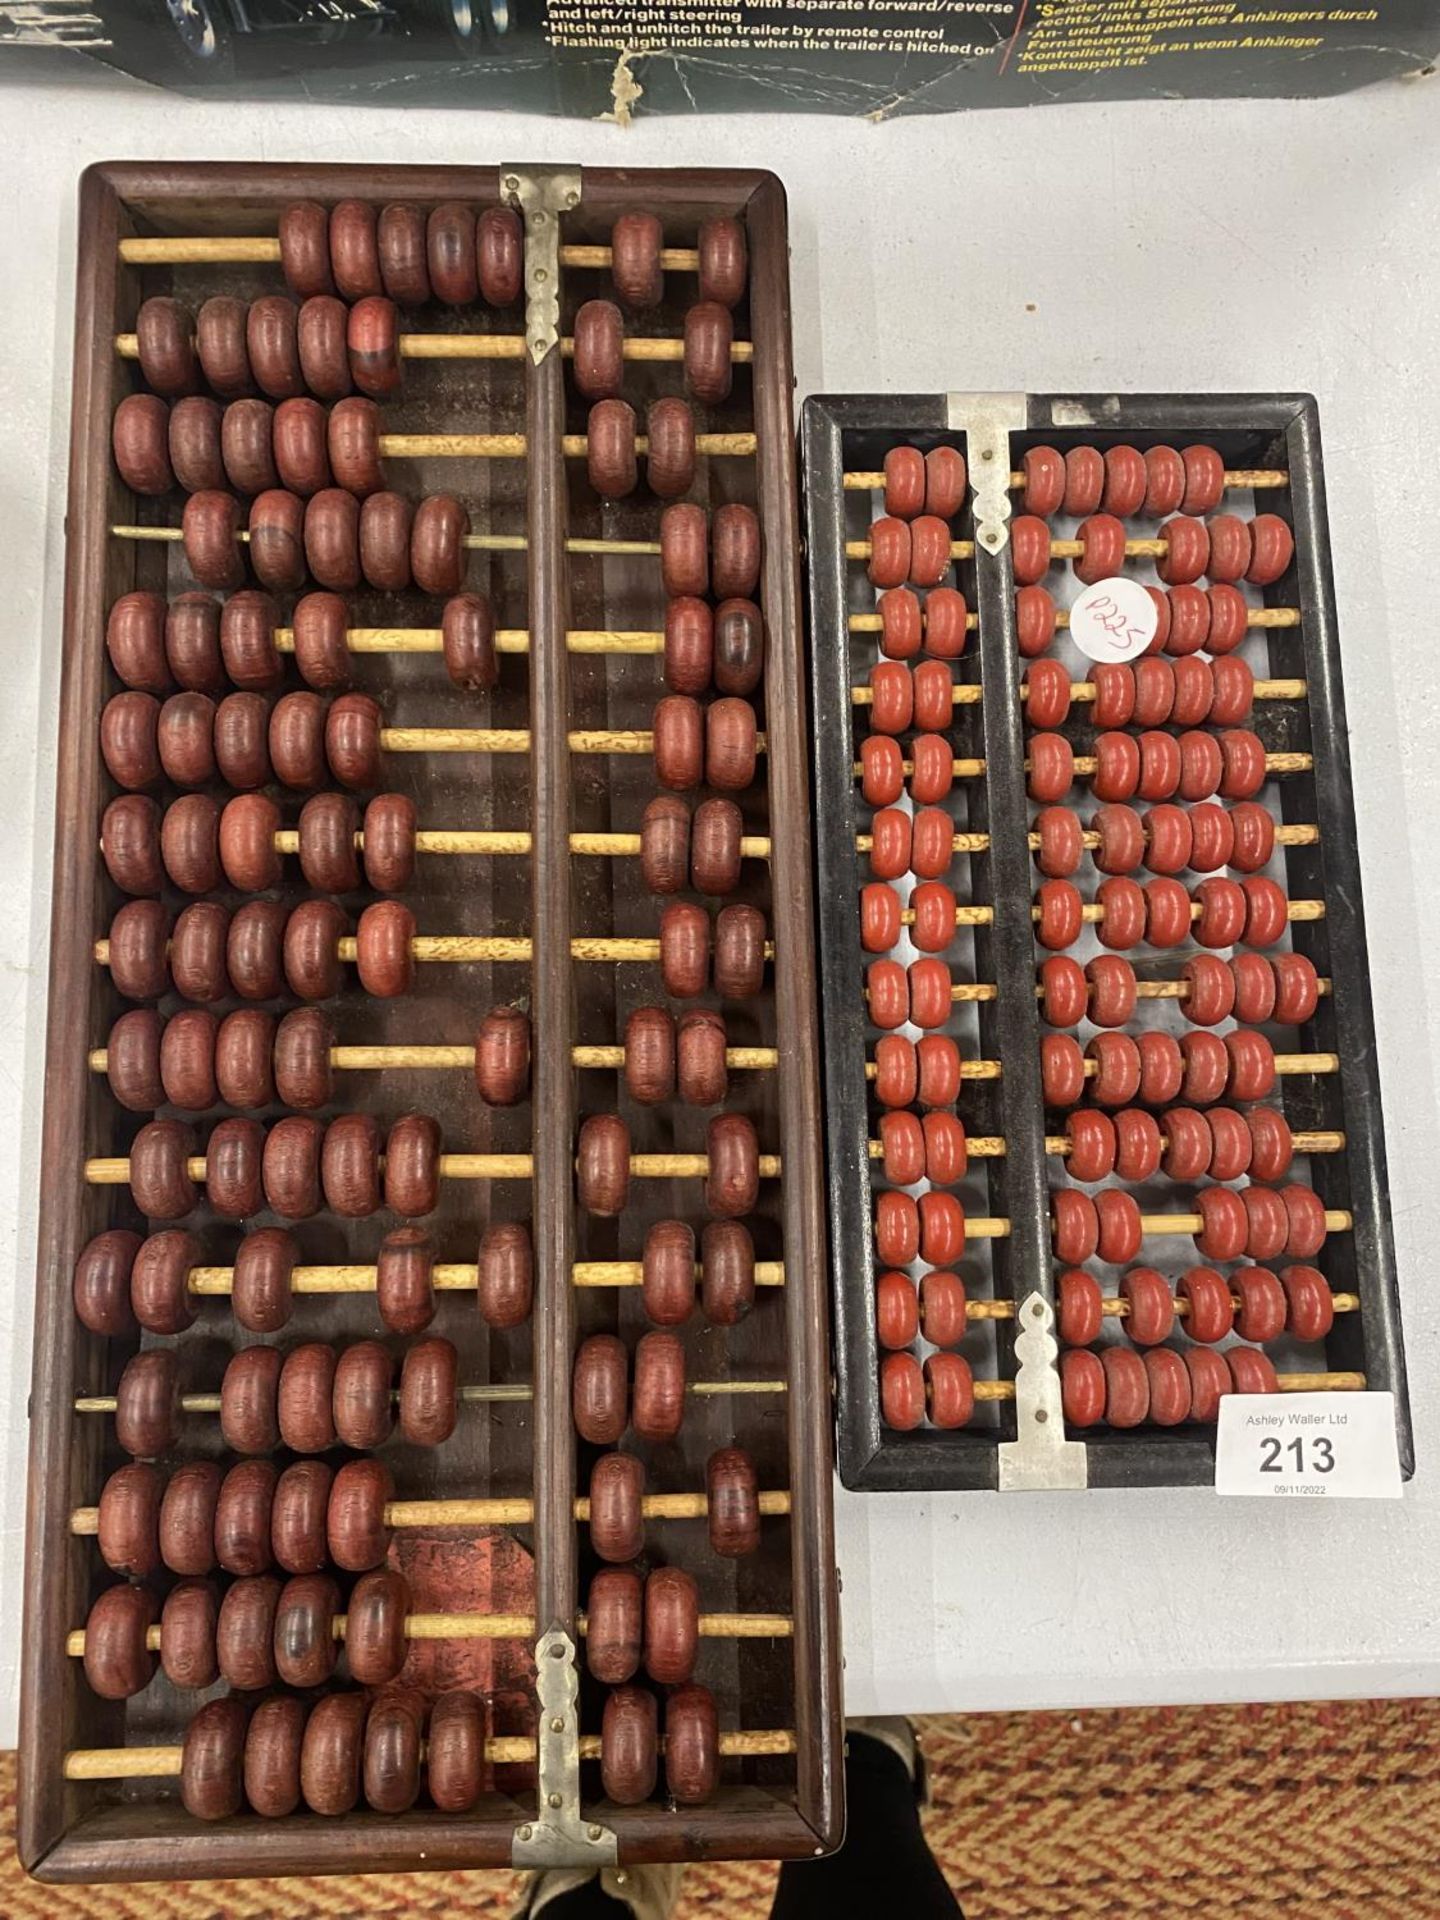 TWO JAPANESE ABACUS WITH INSTRUCTIONS AND A BOOKLET - Image 2 of 2